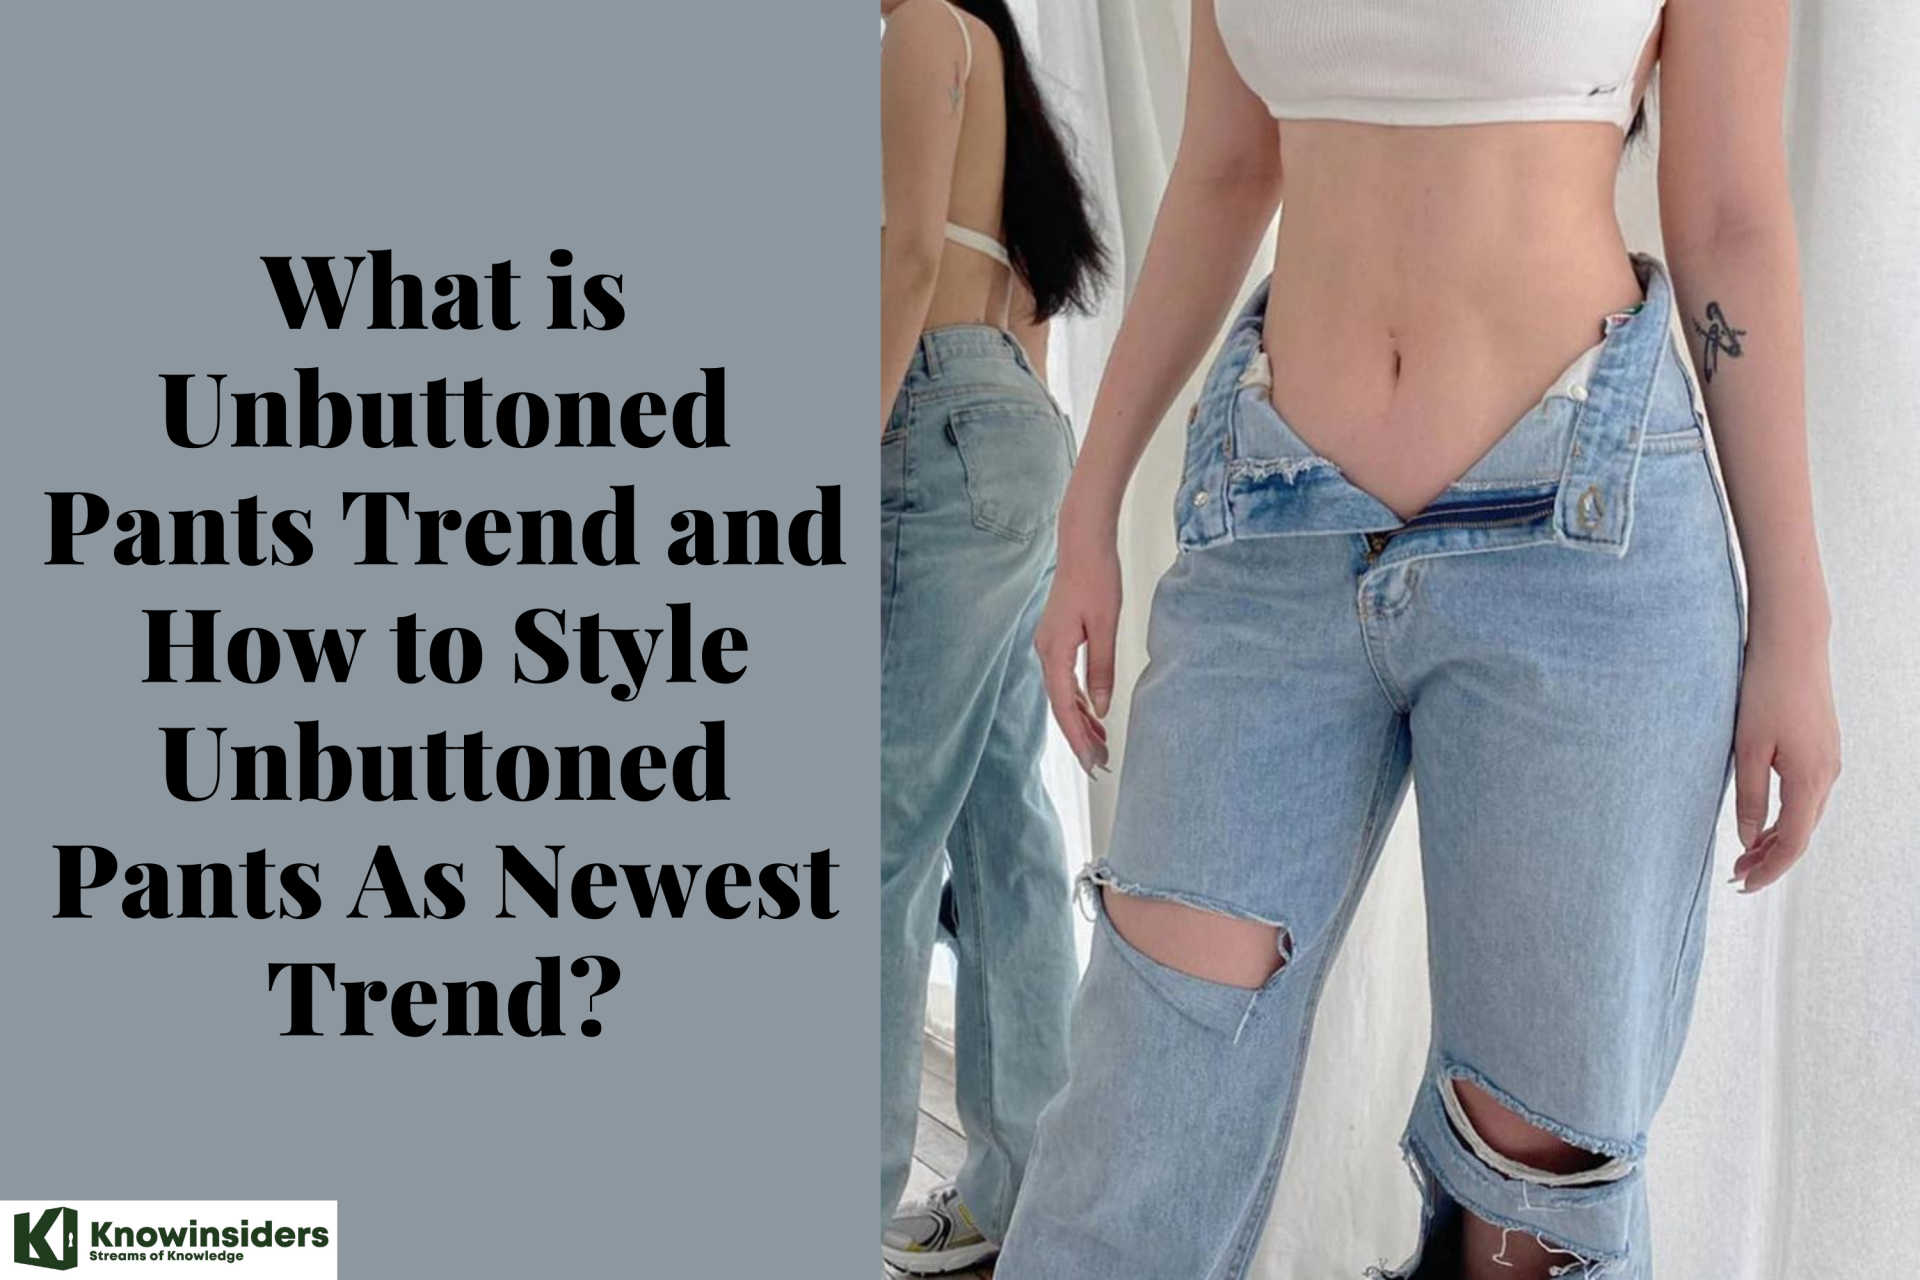 What is Unbuttoned Pants Trend and How to Style Unbuttoned Pants As Newest Trend?